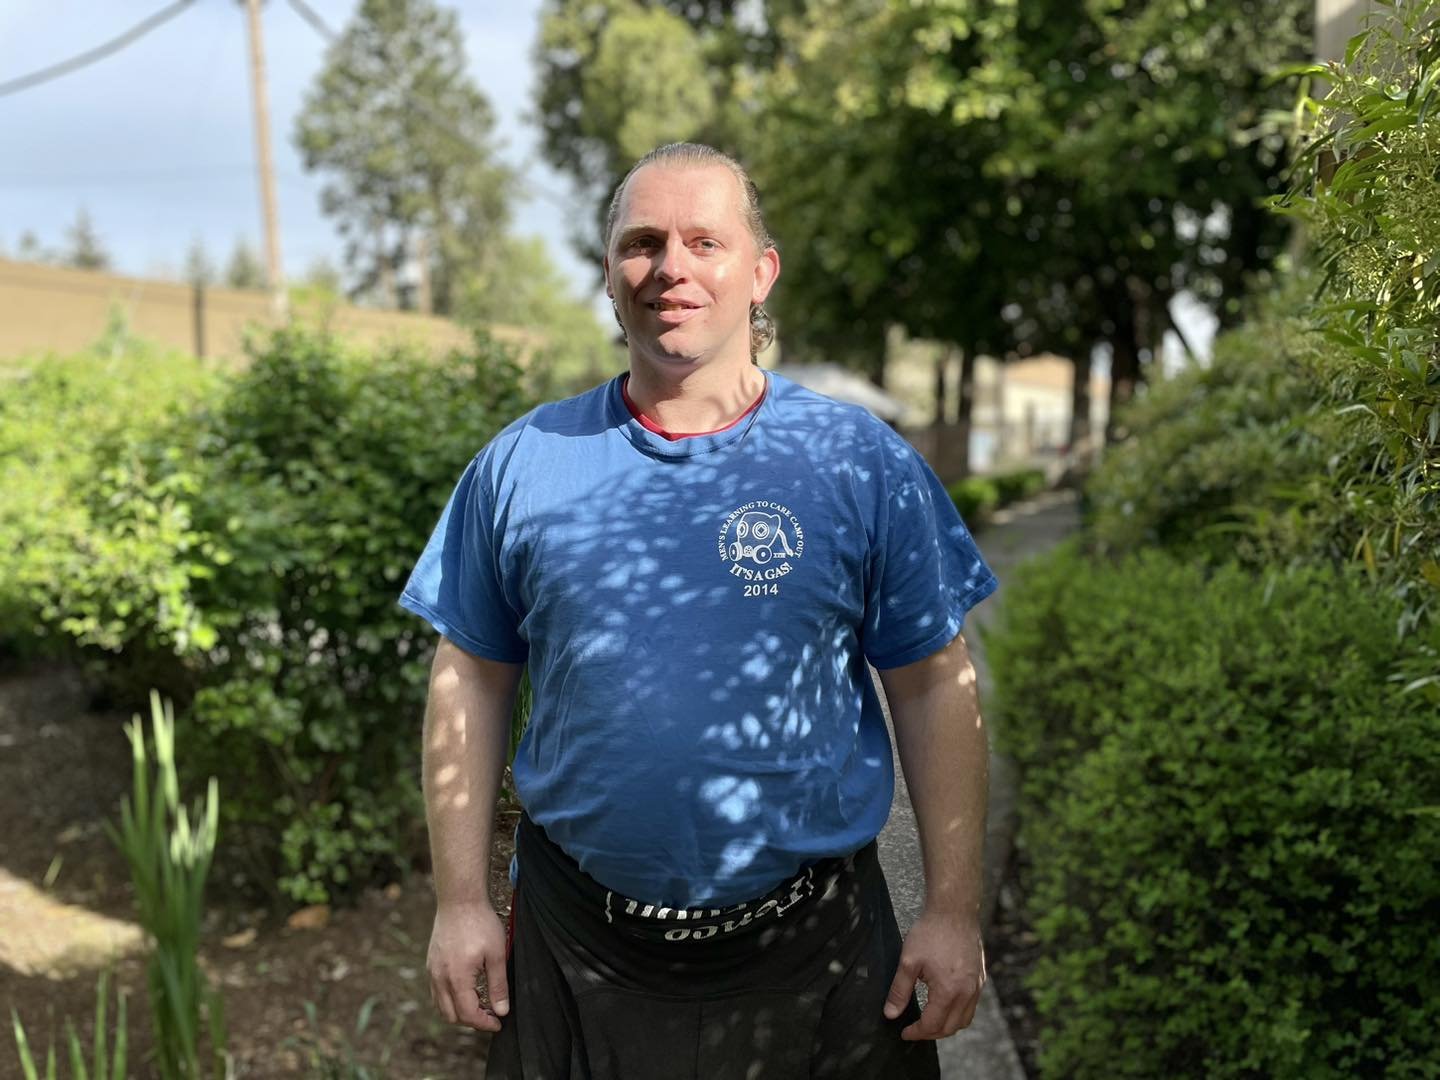 Congrats to Chris, who is starting a new job as a caregiver!
 
Chris, a guest in the Eugene Mission&rsquo;s R3 program, first gained experience in the field through taking care of a relative who needed long-term assistance, and then he obtained his c